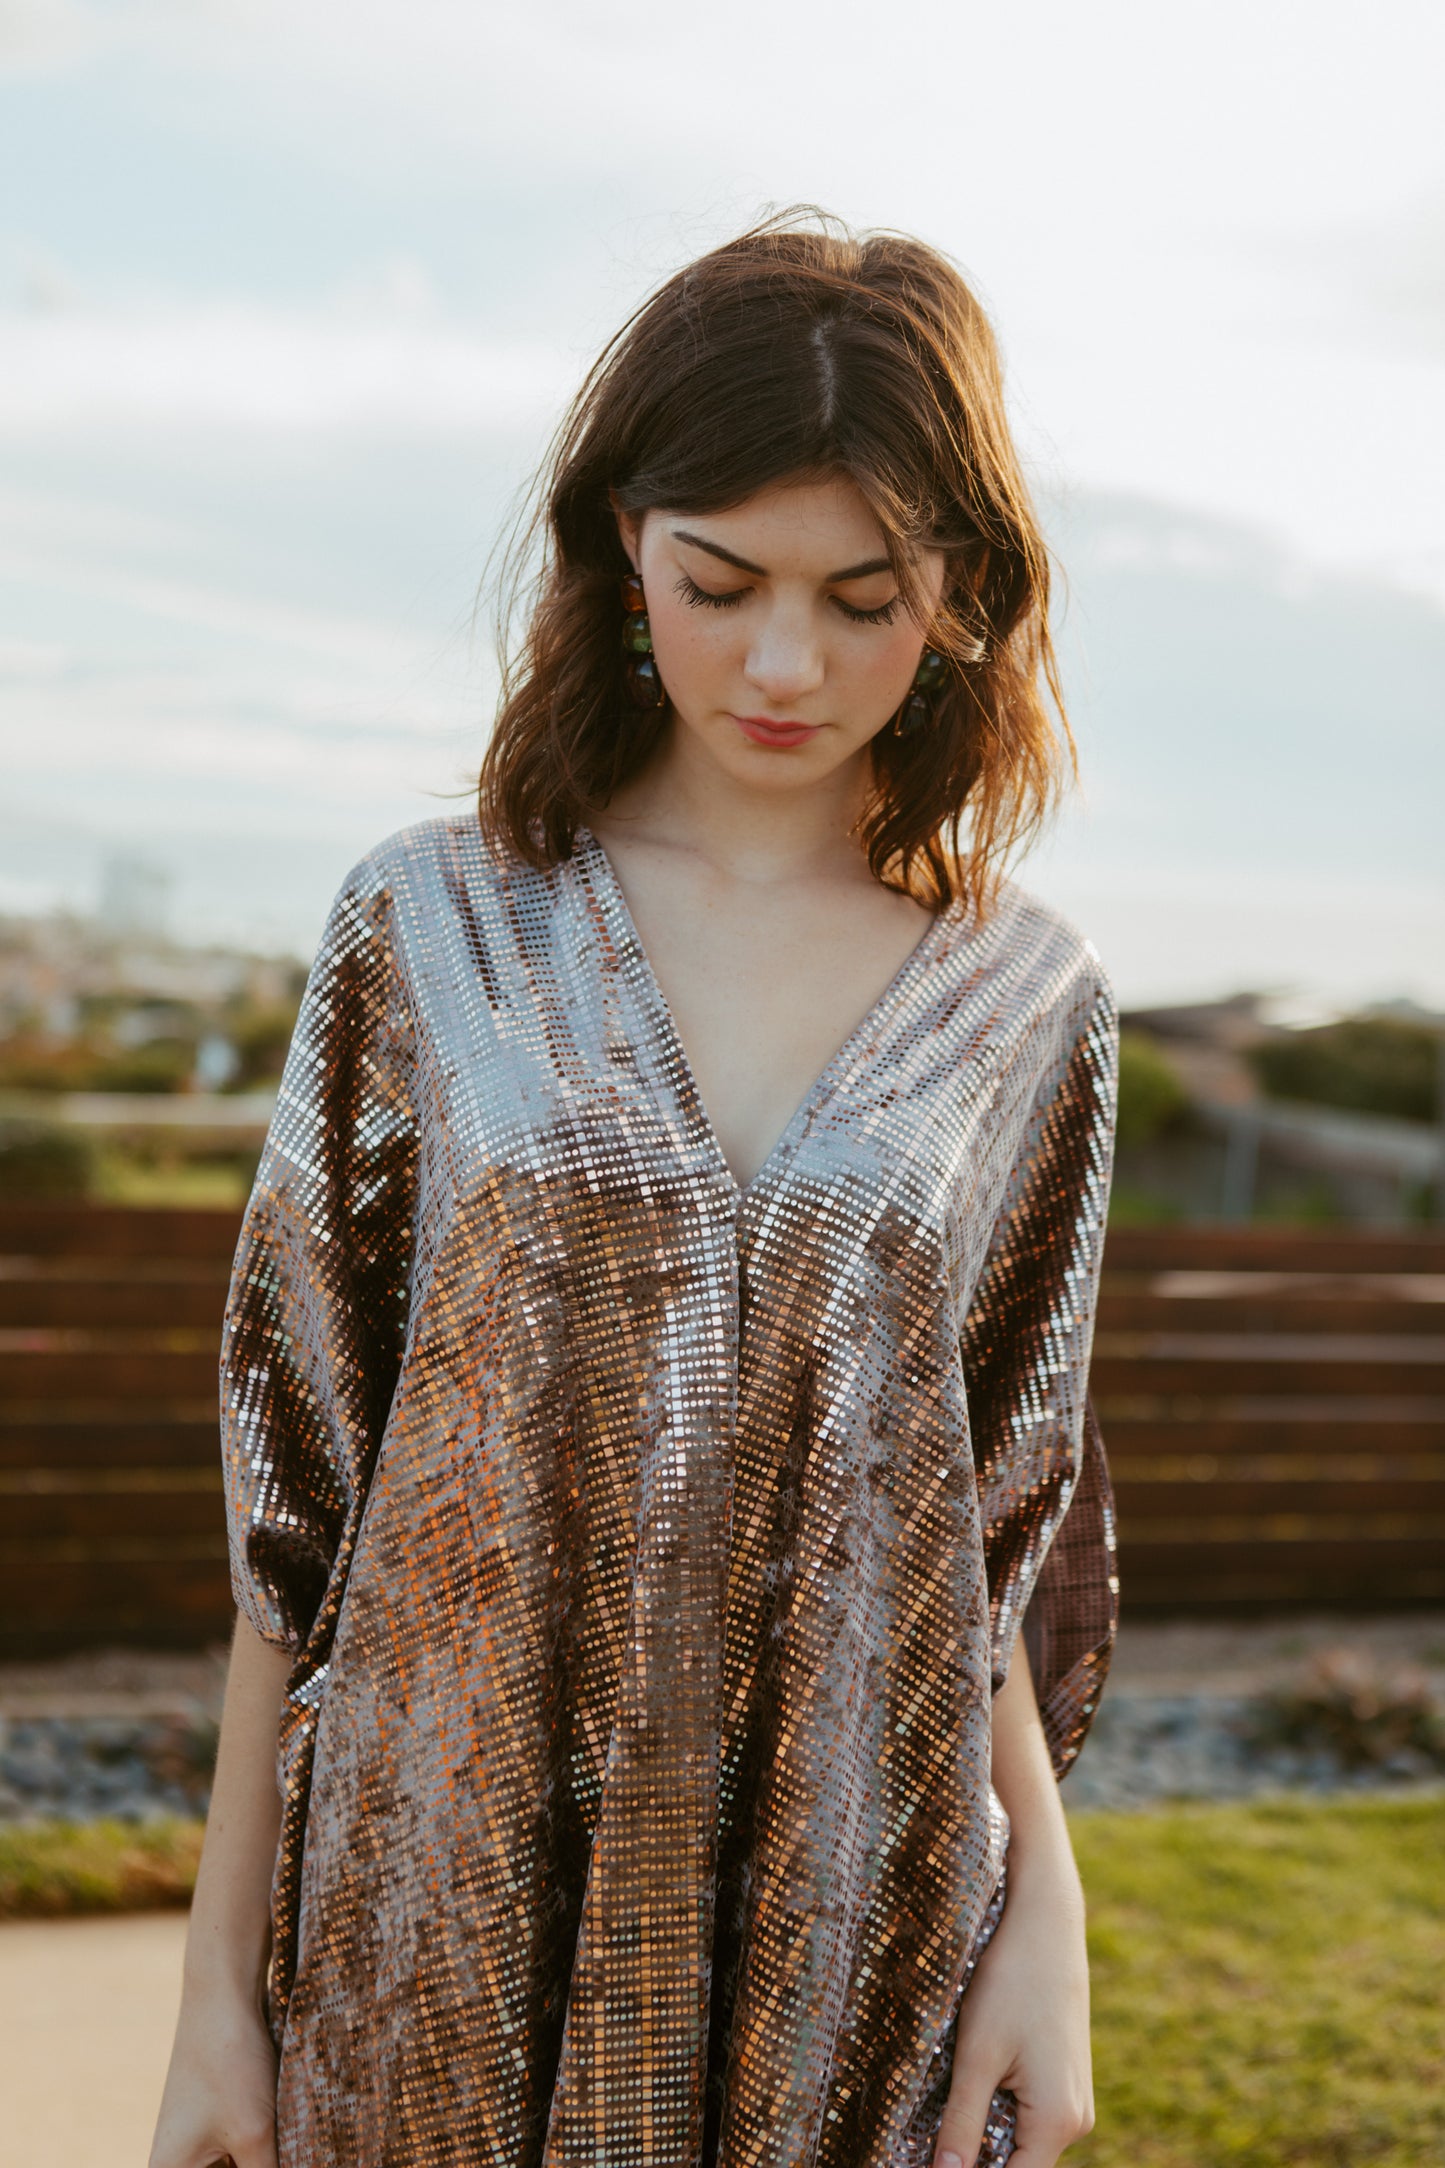 Full length velveteen caftan dress with a geometric metallic rose gold embellishments. Featuring a v-neck, batwing sleeves, and a full length hem. Retro futuristic bohemian style.